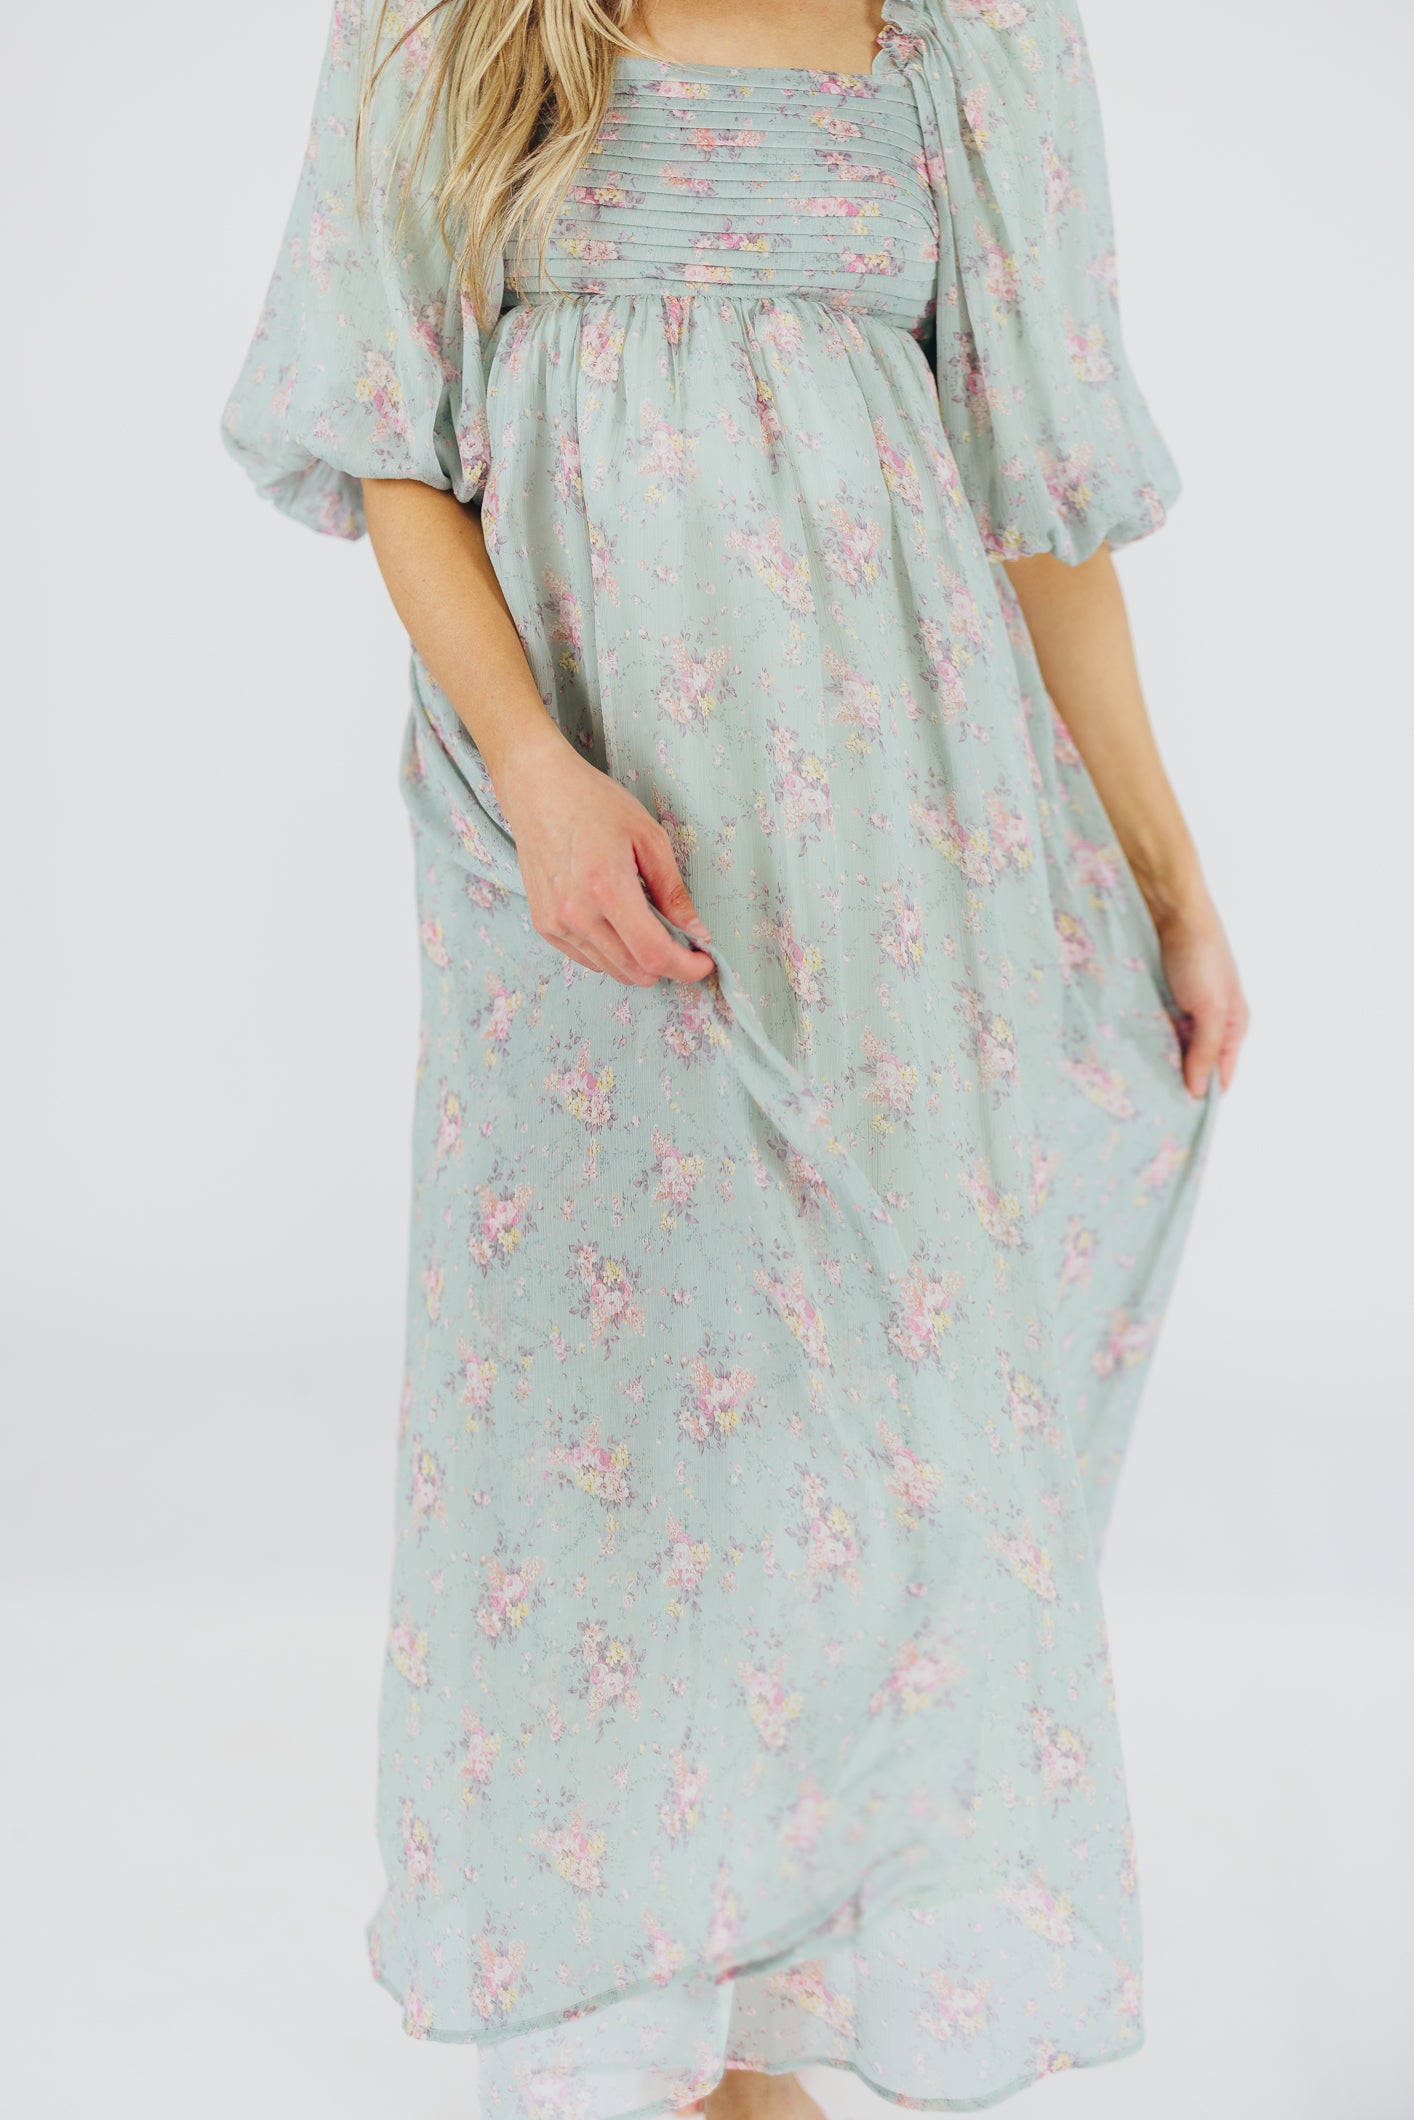 Melody Maxi Dress in Turquoise Floral - Bump Friendly & Inclusive Sizing (S-3XL)